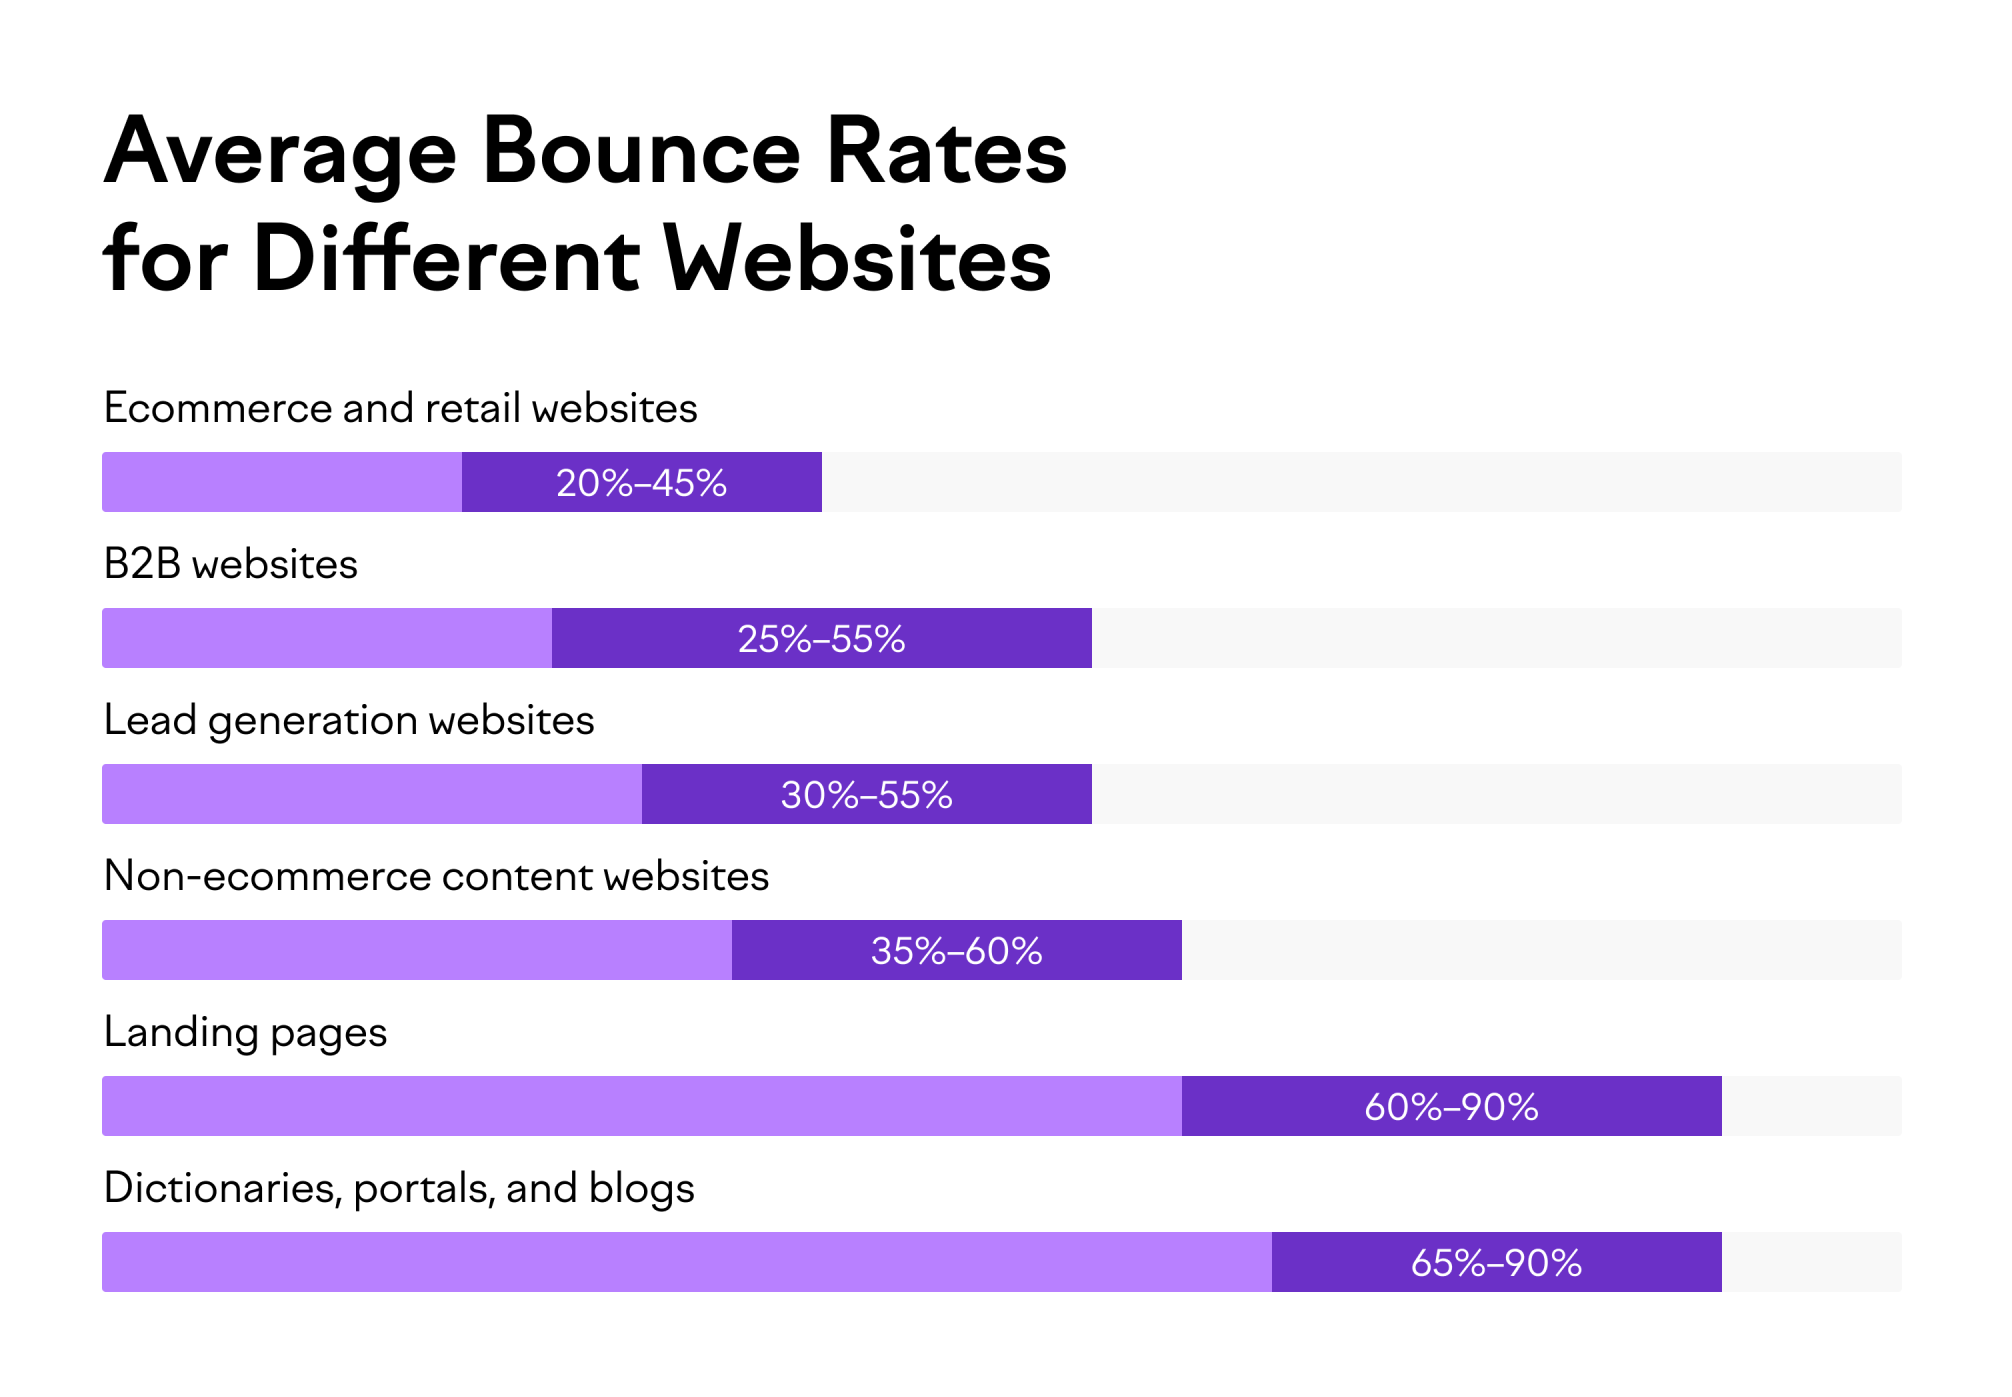 bounce rate in google analytics